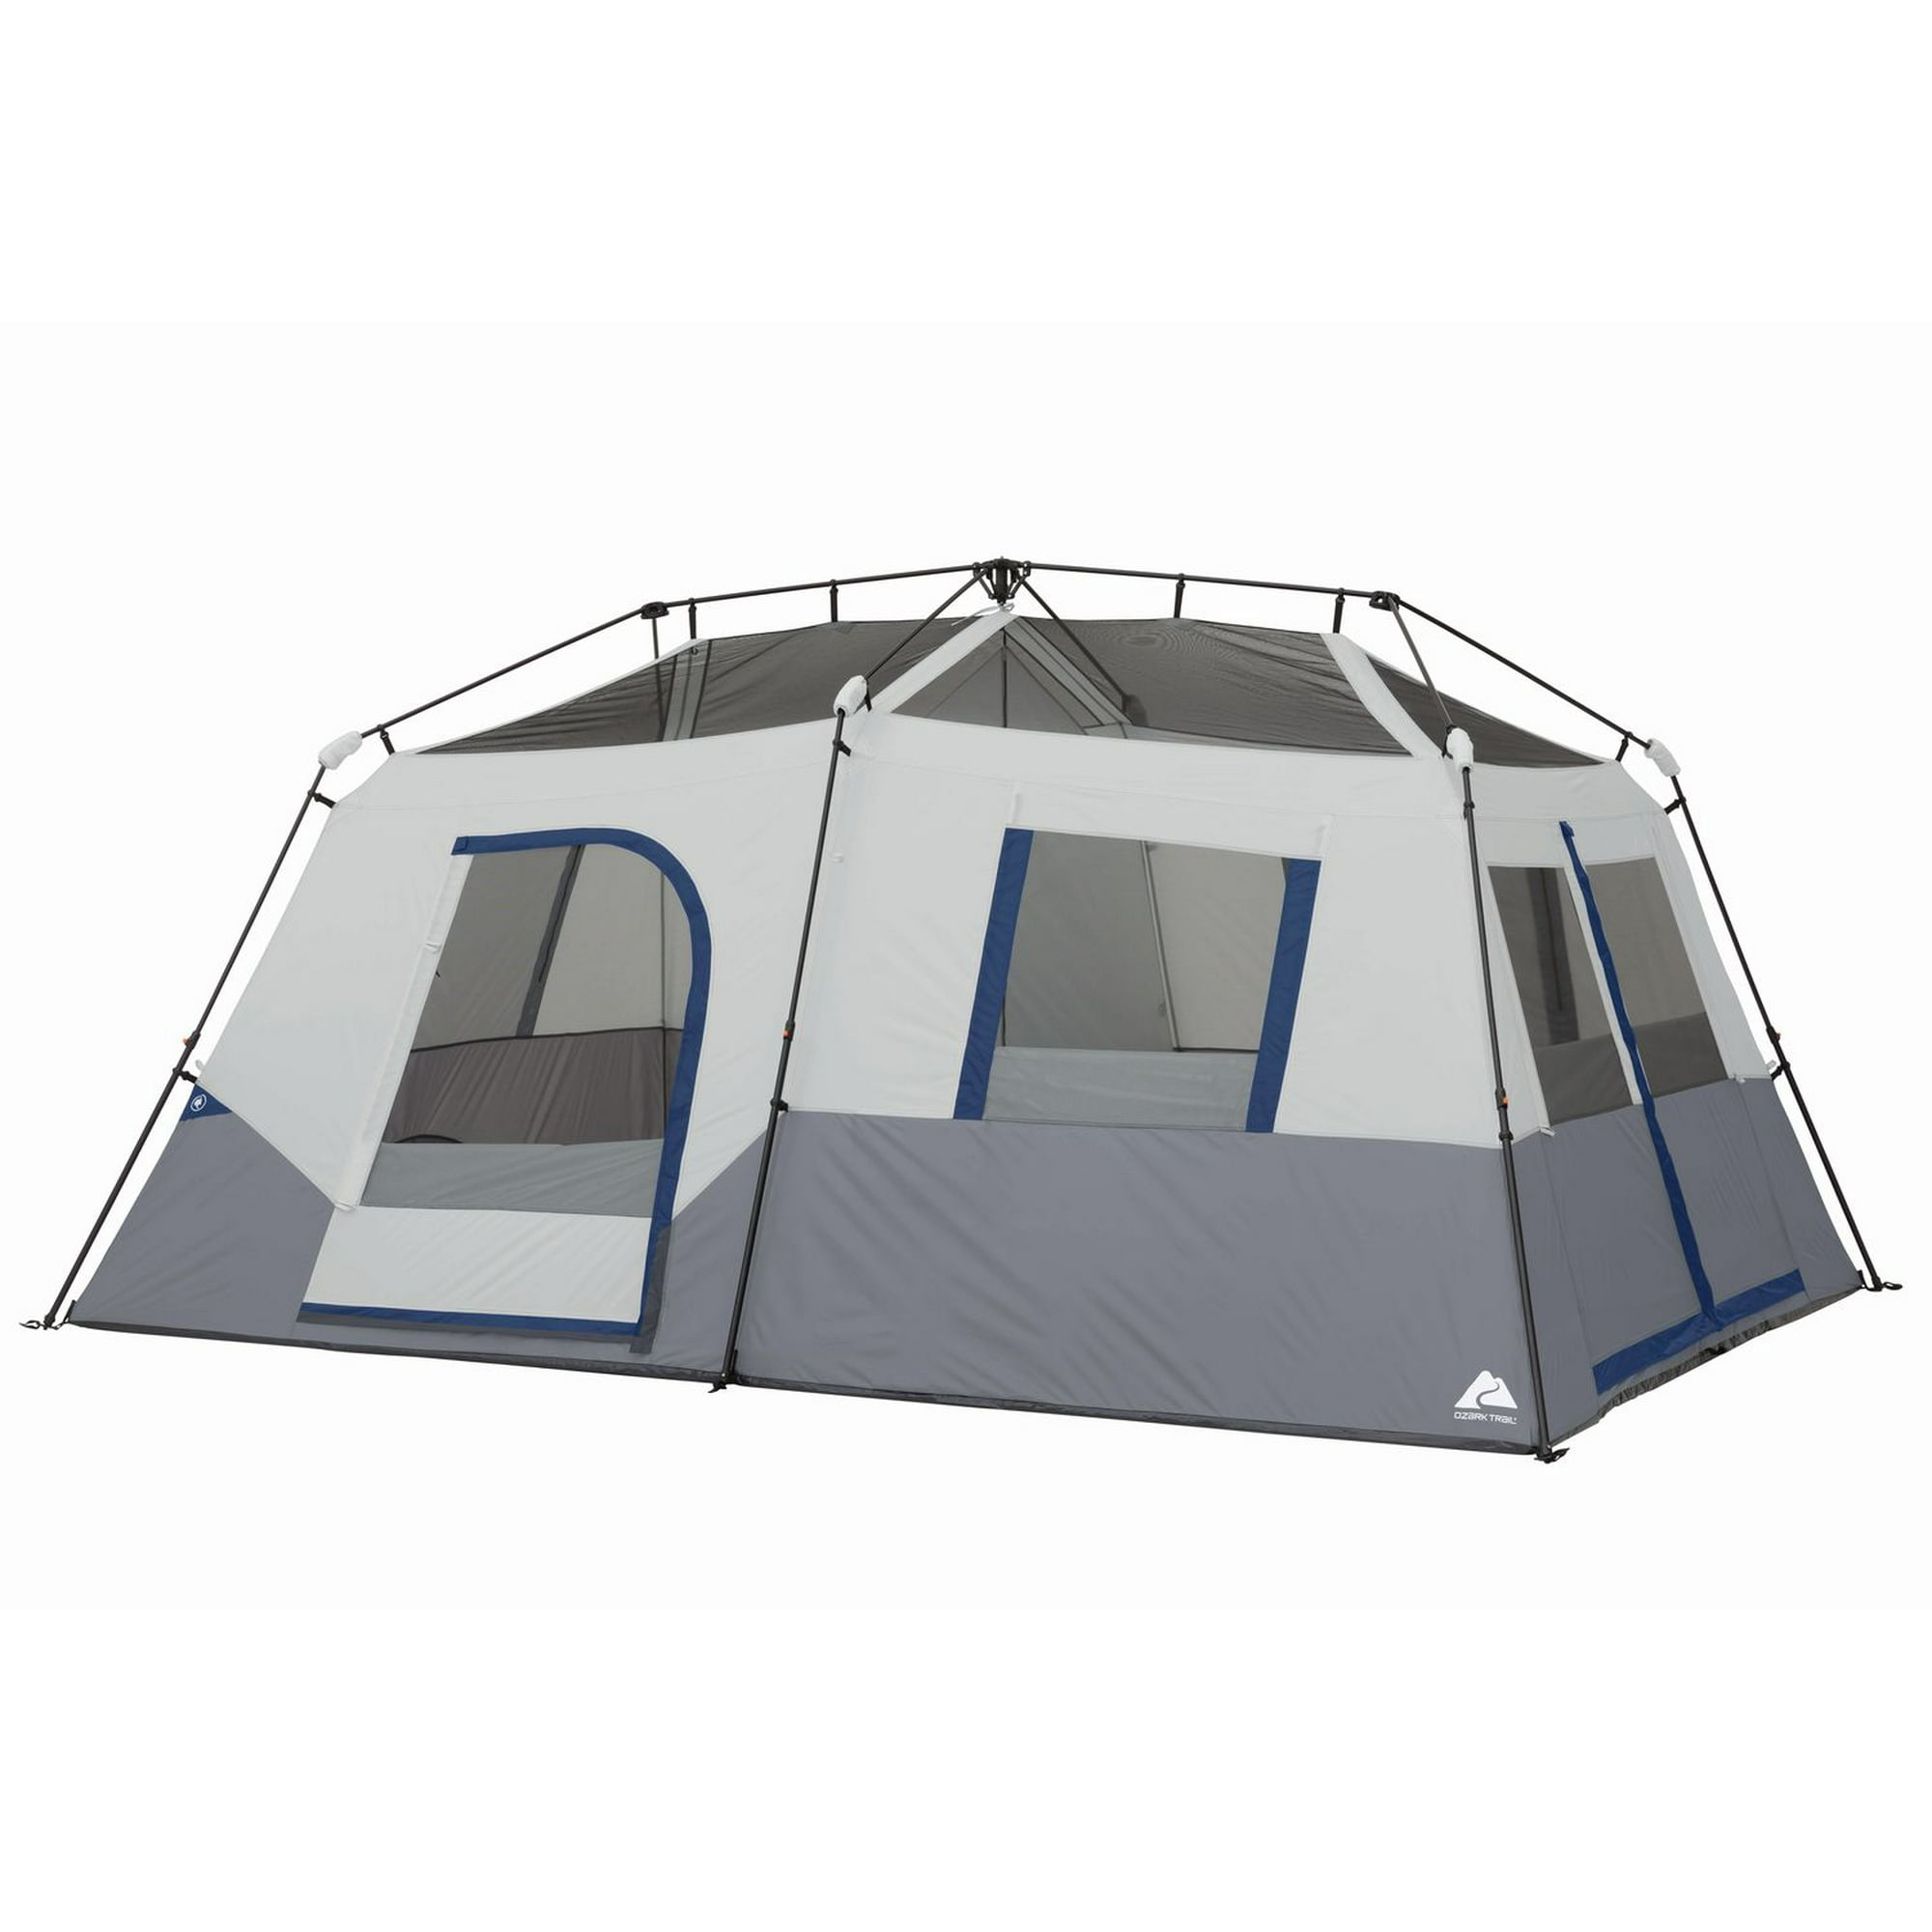 CORE 10 Person Tent, Large Multi Room Tent for Family with Full Rainfly  for Weather Protection and Storage for Camping Accessories